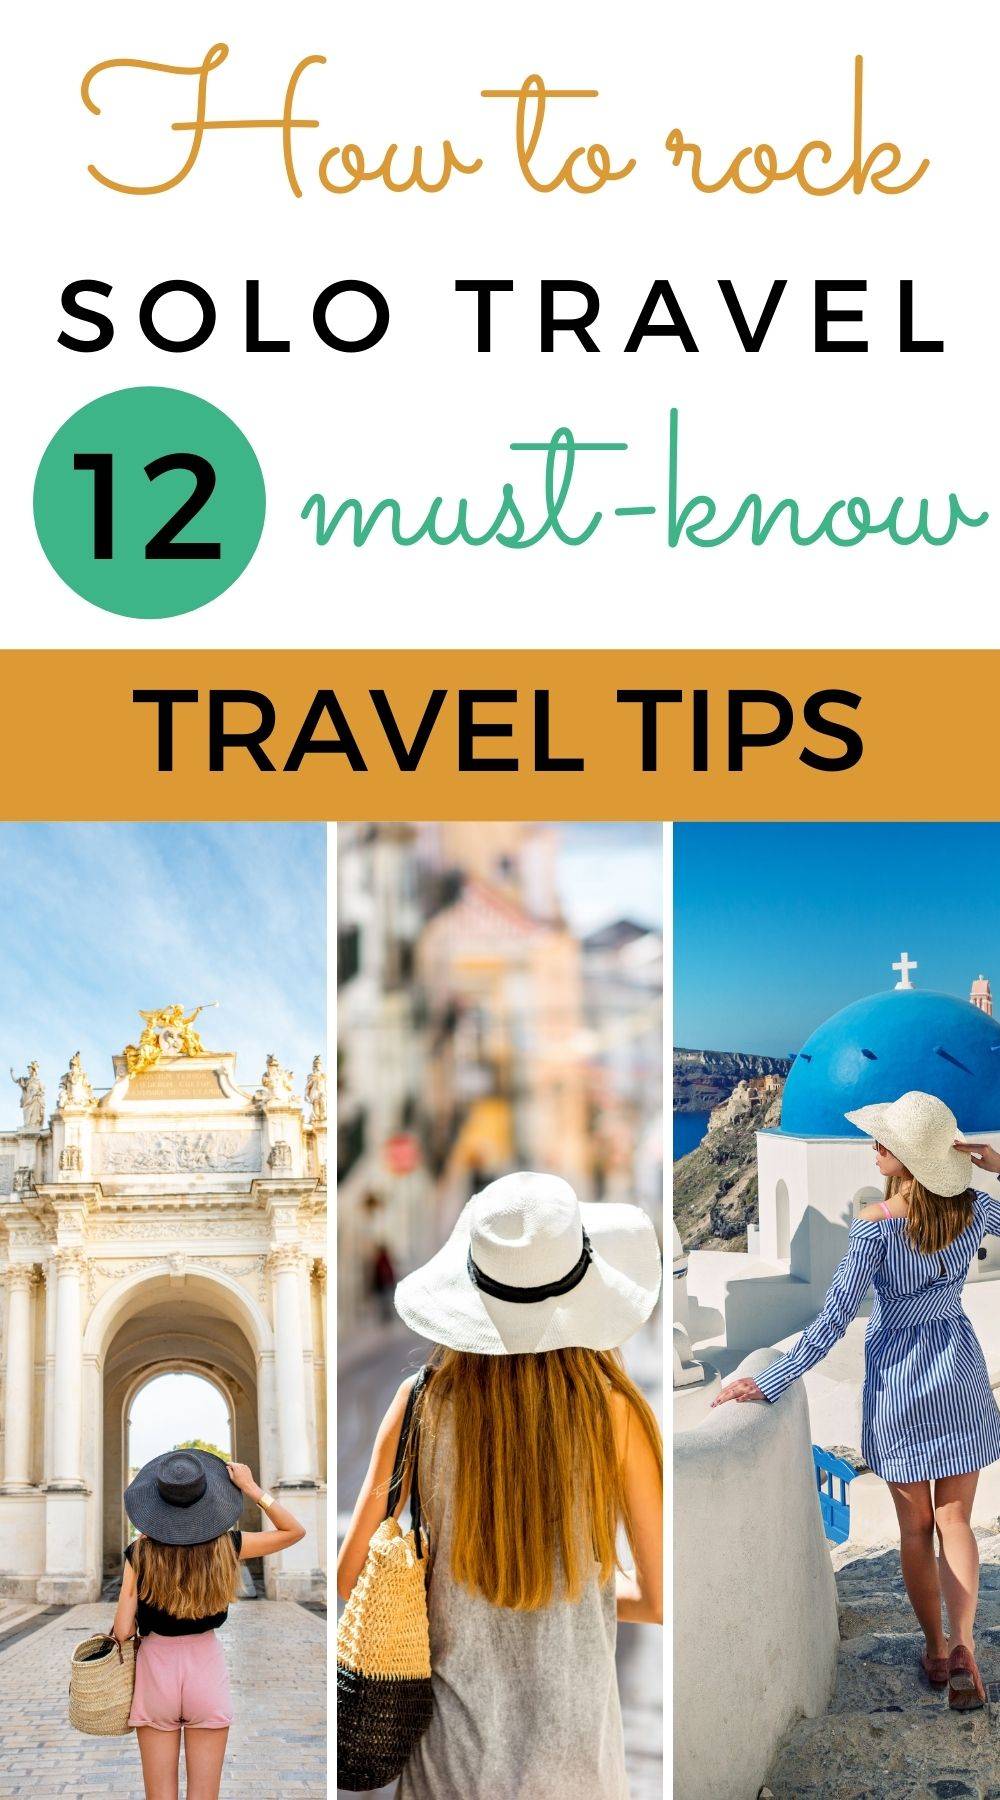 Solo travel tips